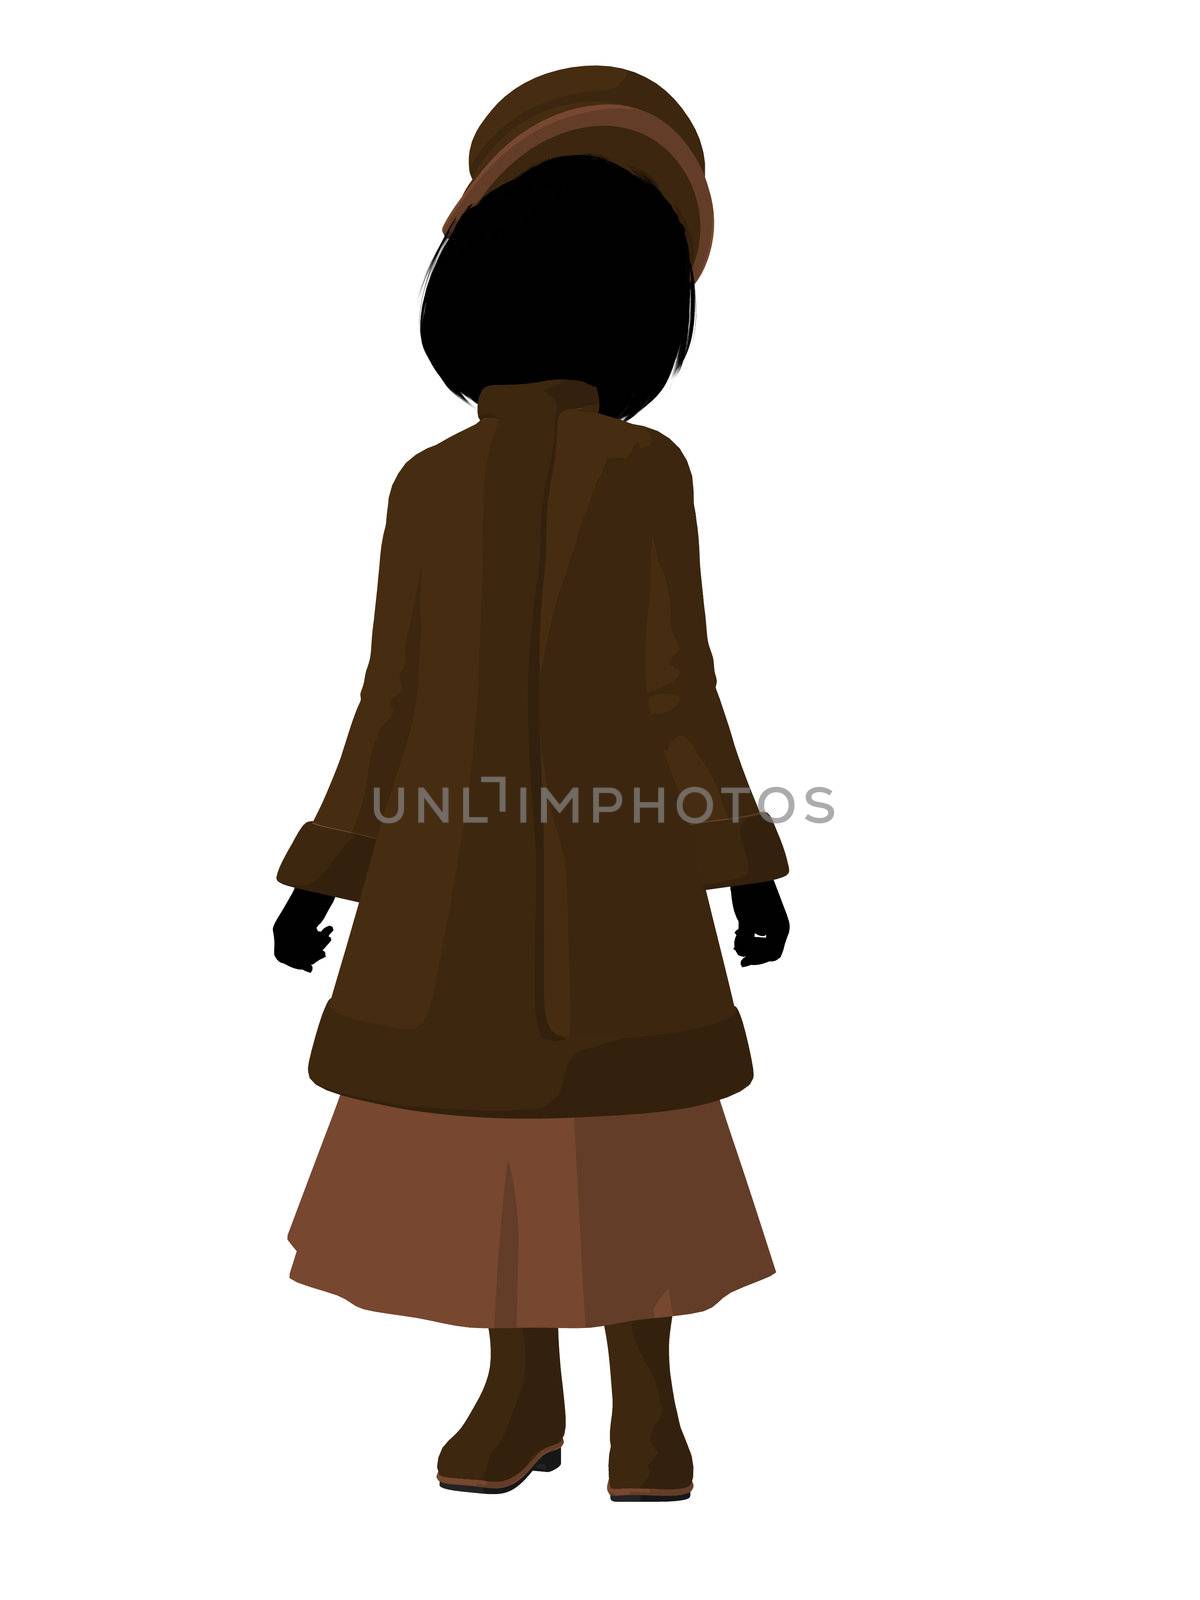 Victorian Girl Illustration Silhouette by kathygold